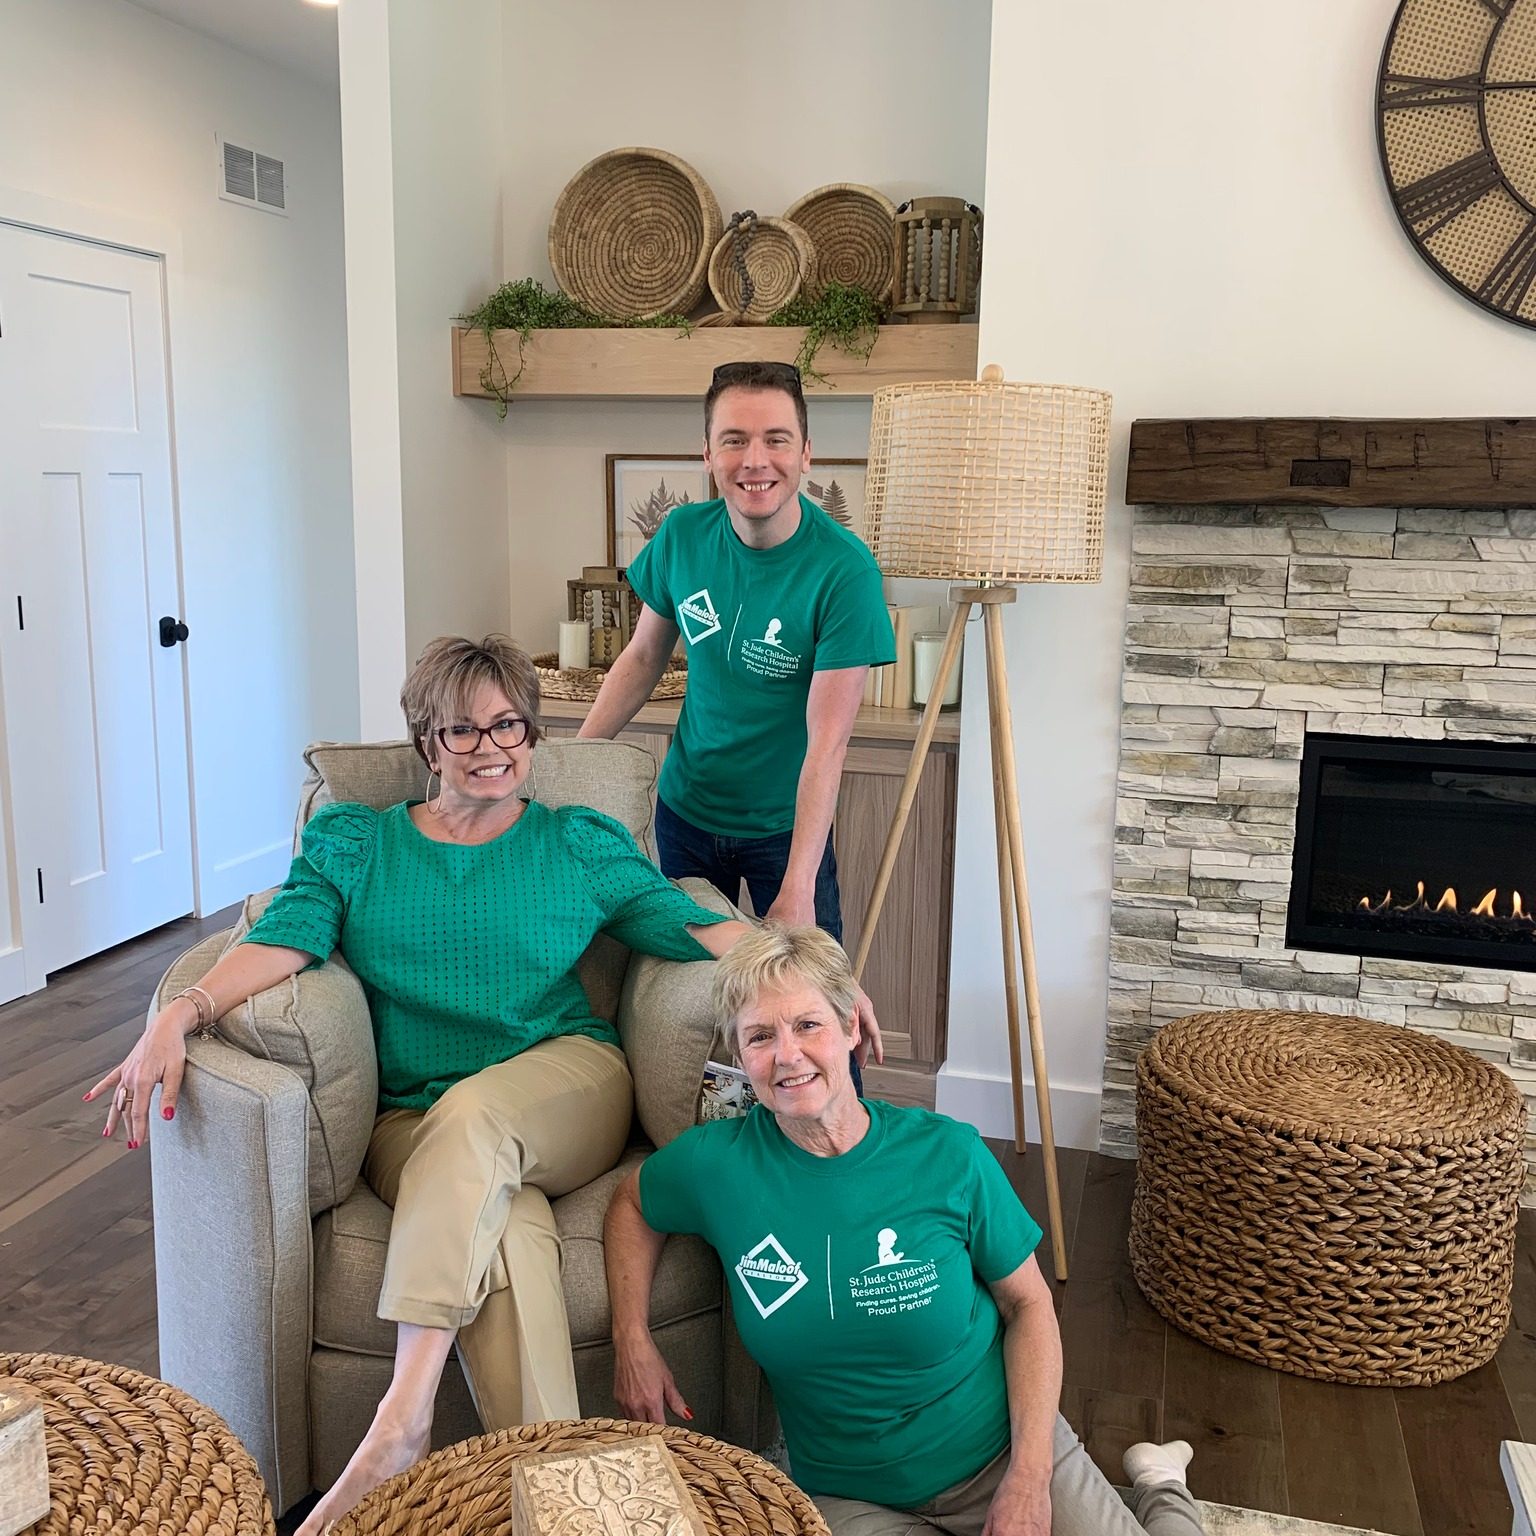 JimMaloof/REALTOR® agents and staff volunteer open house showings at the 2022 St. Jude Dream Home.